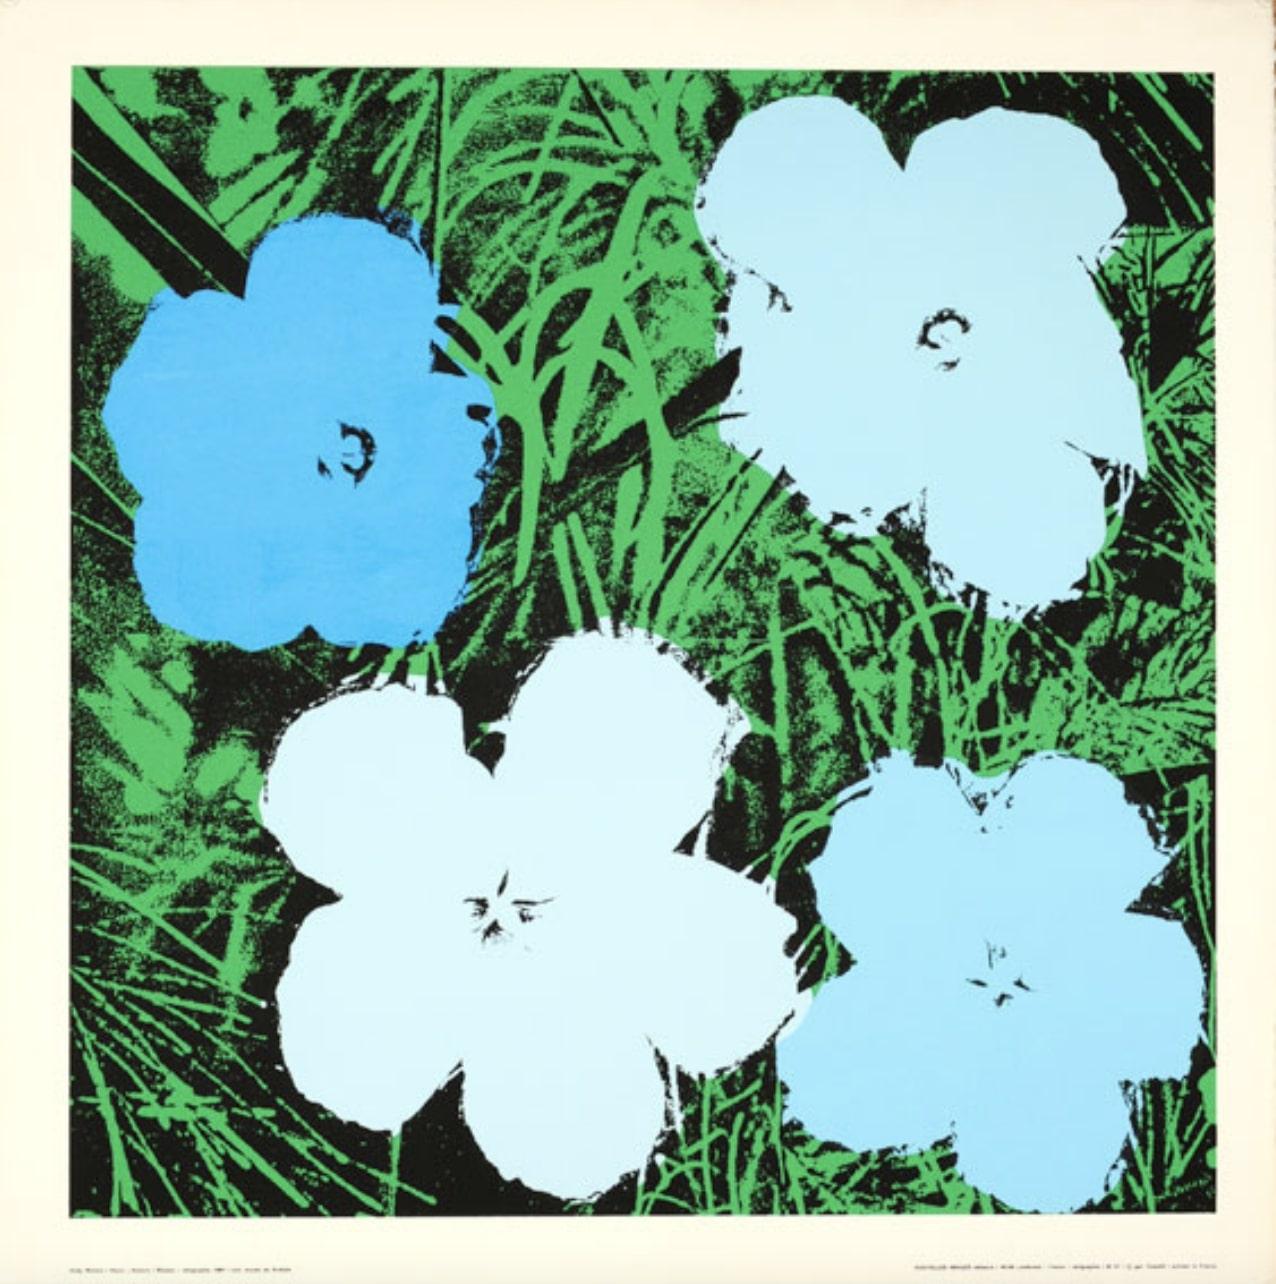 The Flowers series was created by Andy Warhol in 1964 originally in the USA. This printing was done for the general public at a later date in France. Printed on heavy Canson (Watercolor arches paper). 